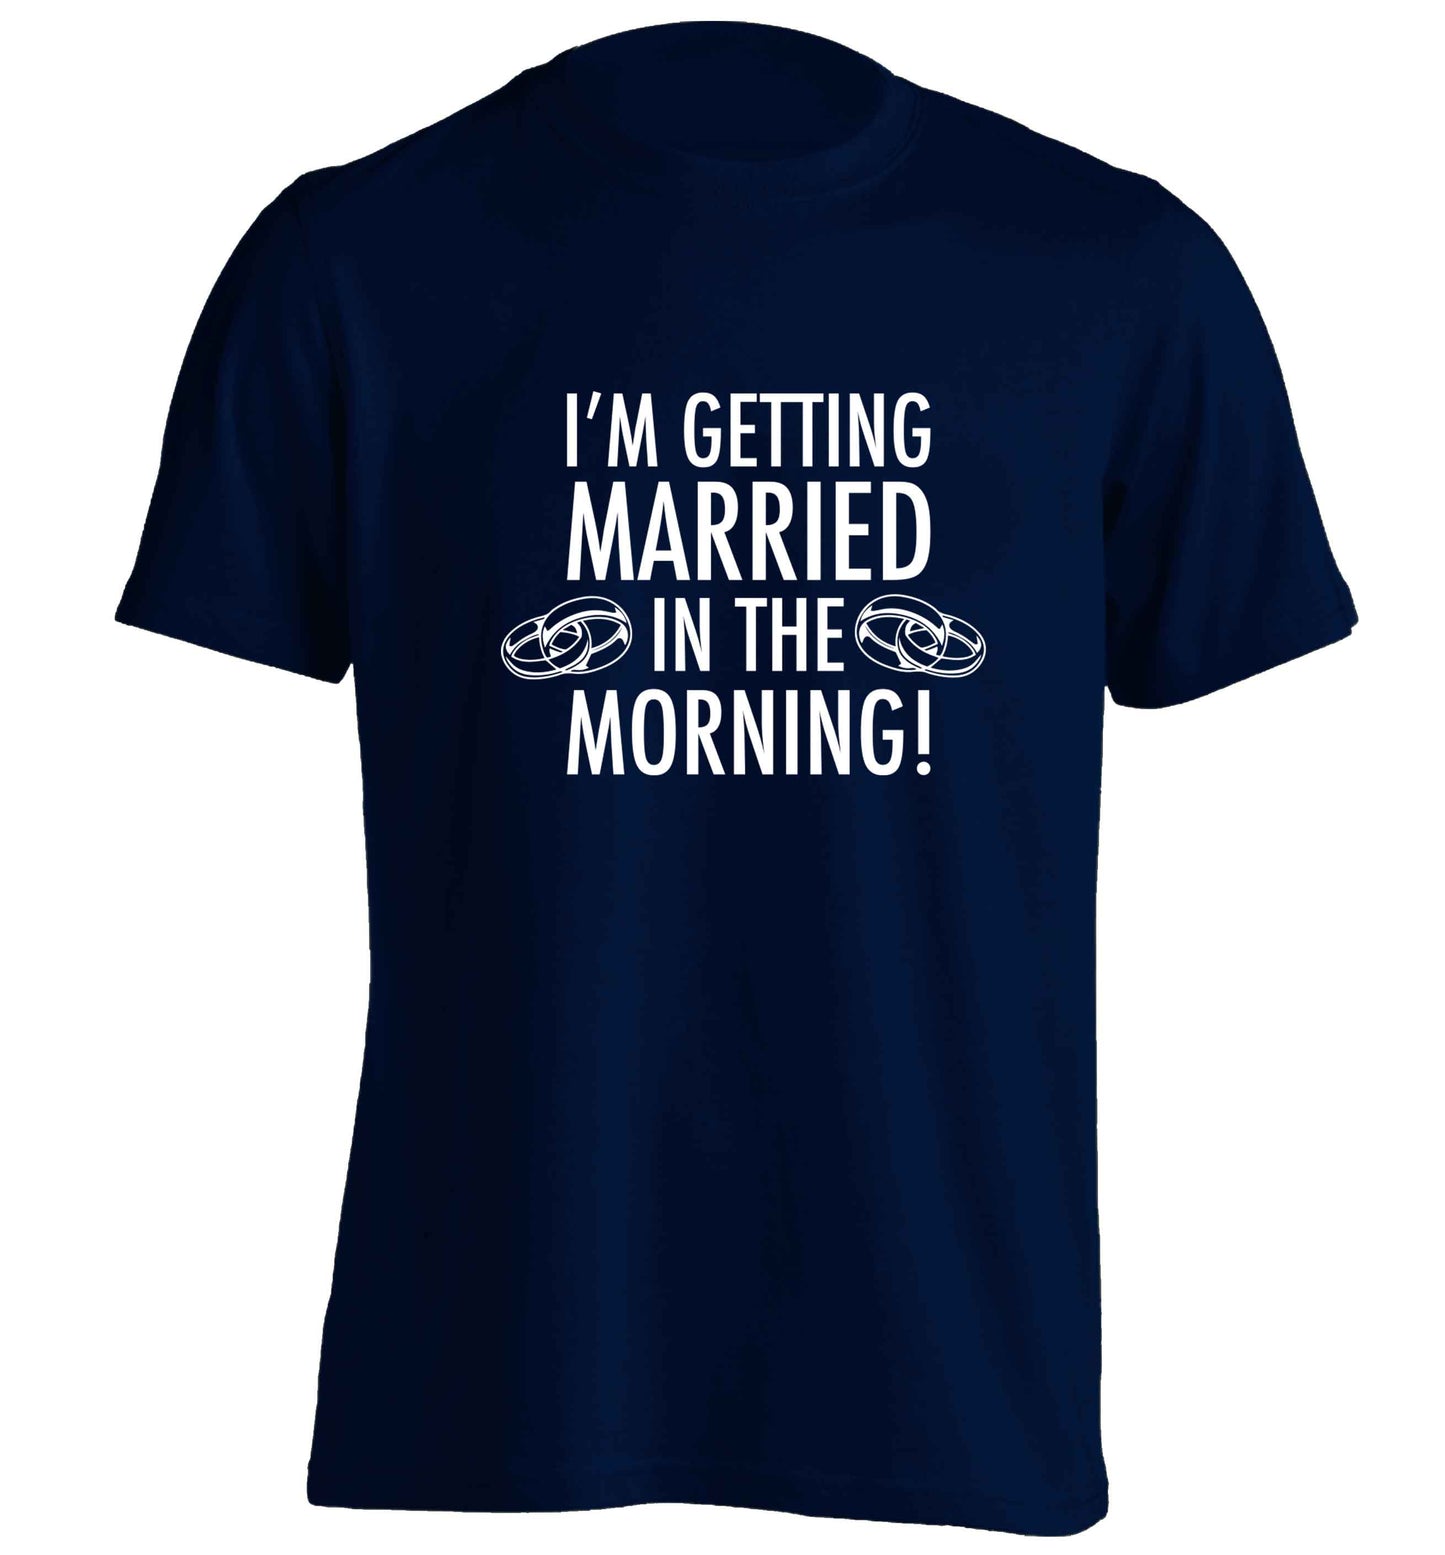 I'm getting married in the morning! adults unisex navy Tshirt 2XL